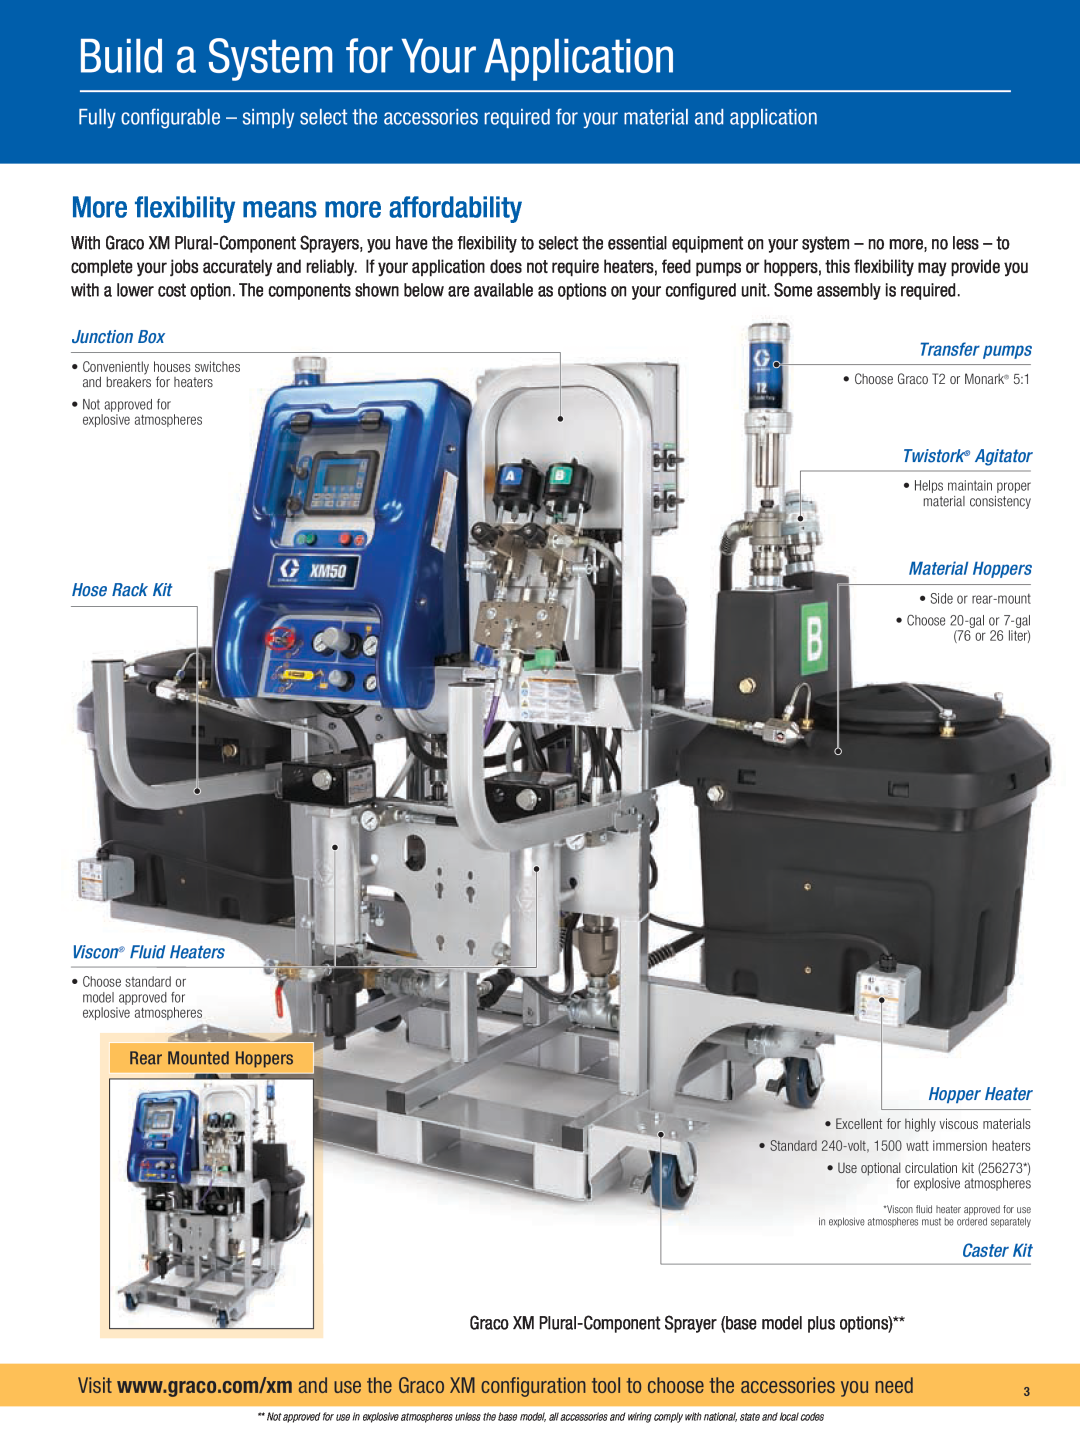 Graco Inc Plural-Component Build a System for Your Application, More flexibility means more affordability, Junction Box 